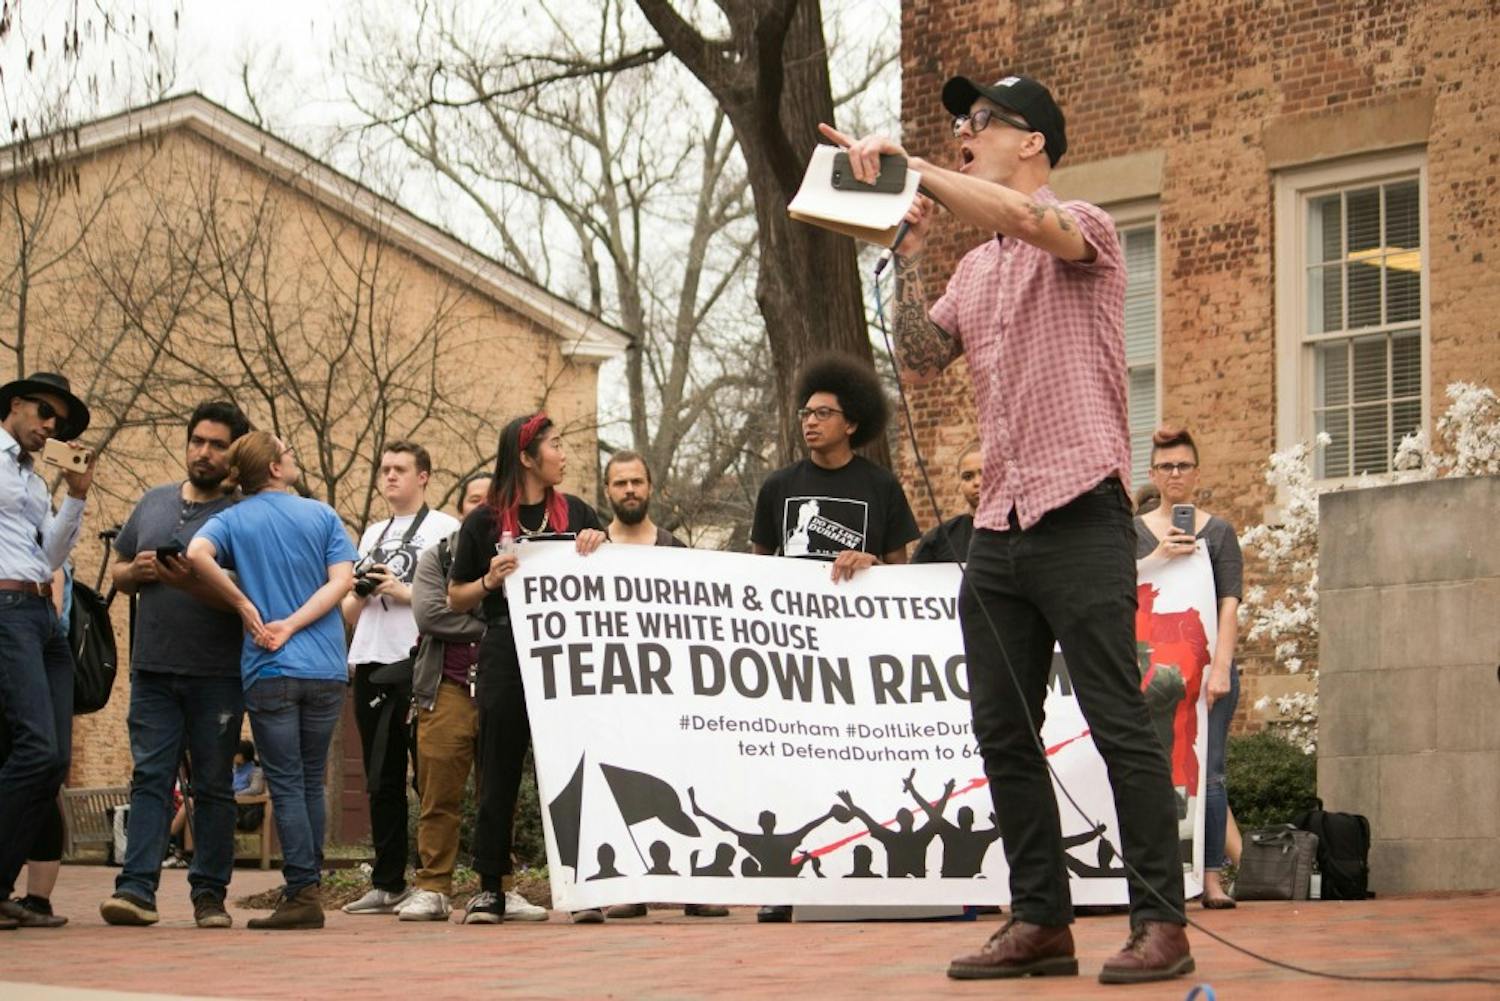 Asian studies professor Dwayne Dixon was among the faculty members receiving death threats from white supremacist groups. Dixon spoke during Wednesday's anti-fascism rally on UNC campus.